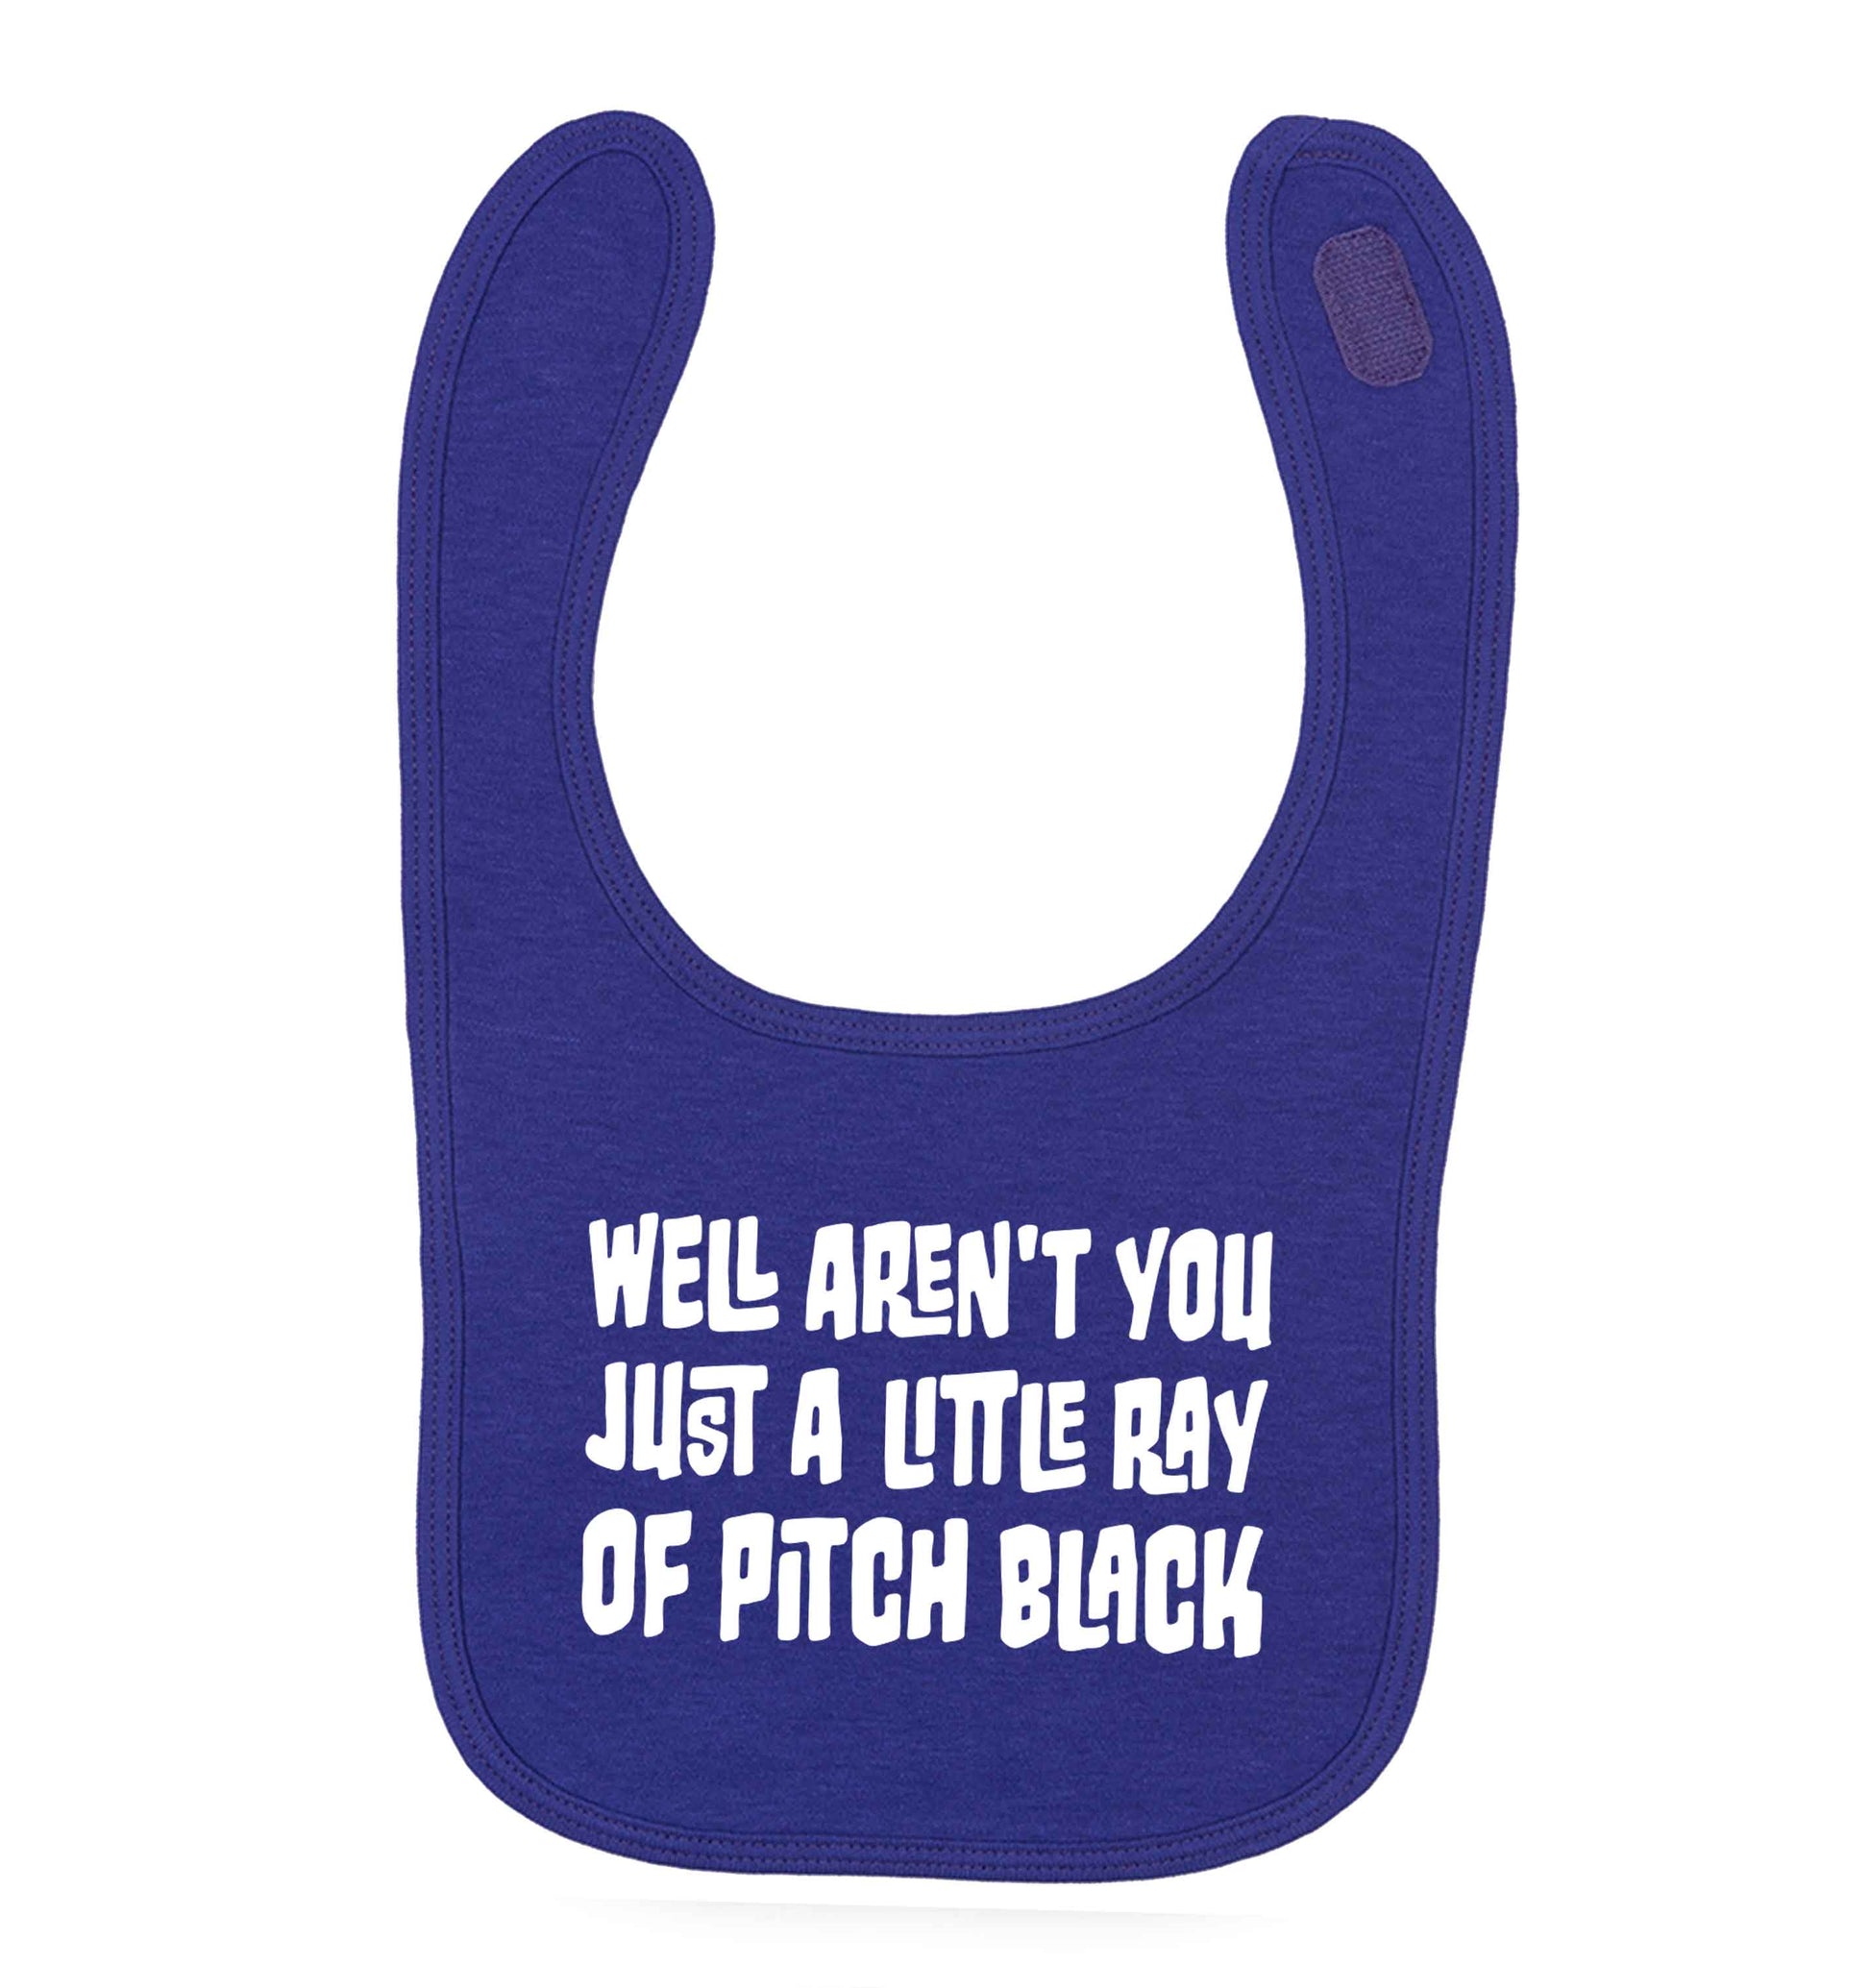 Well aren't you just a little ray of pitch black Kit purple baby bib